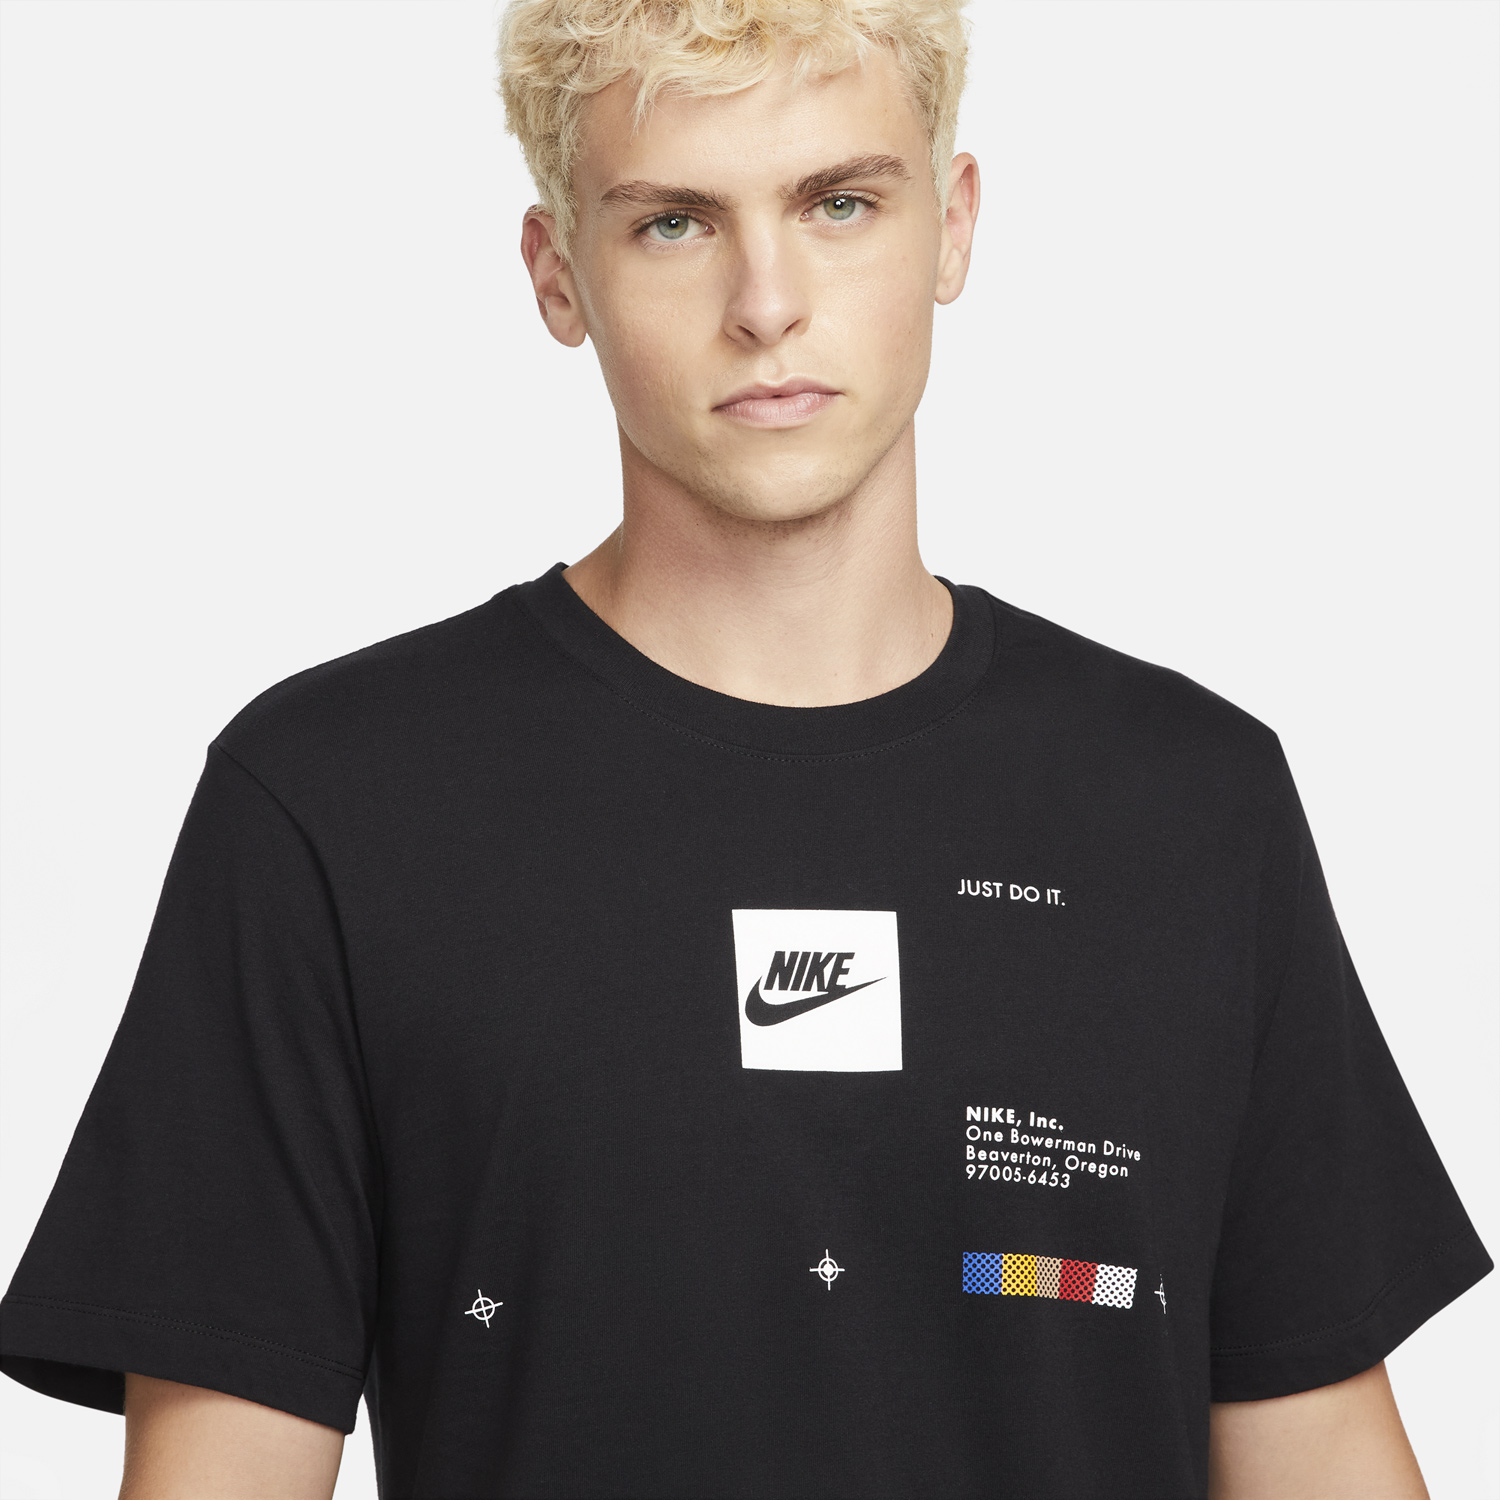 Nike Alter and Reveal Sneakers Shirts and Clothing